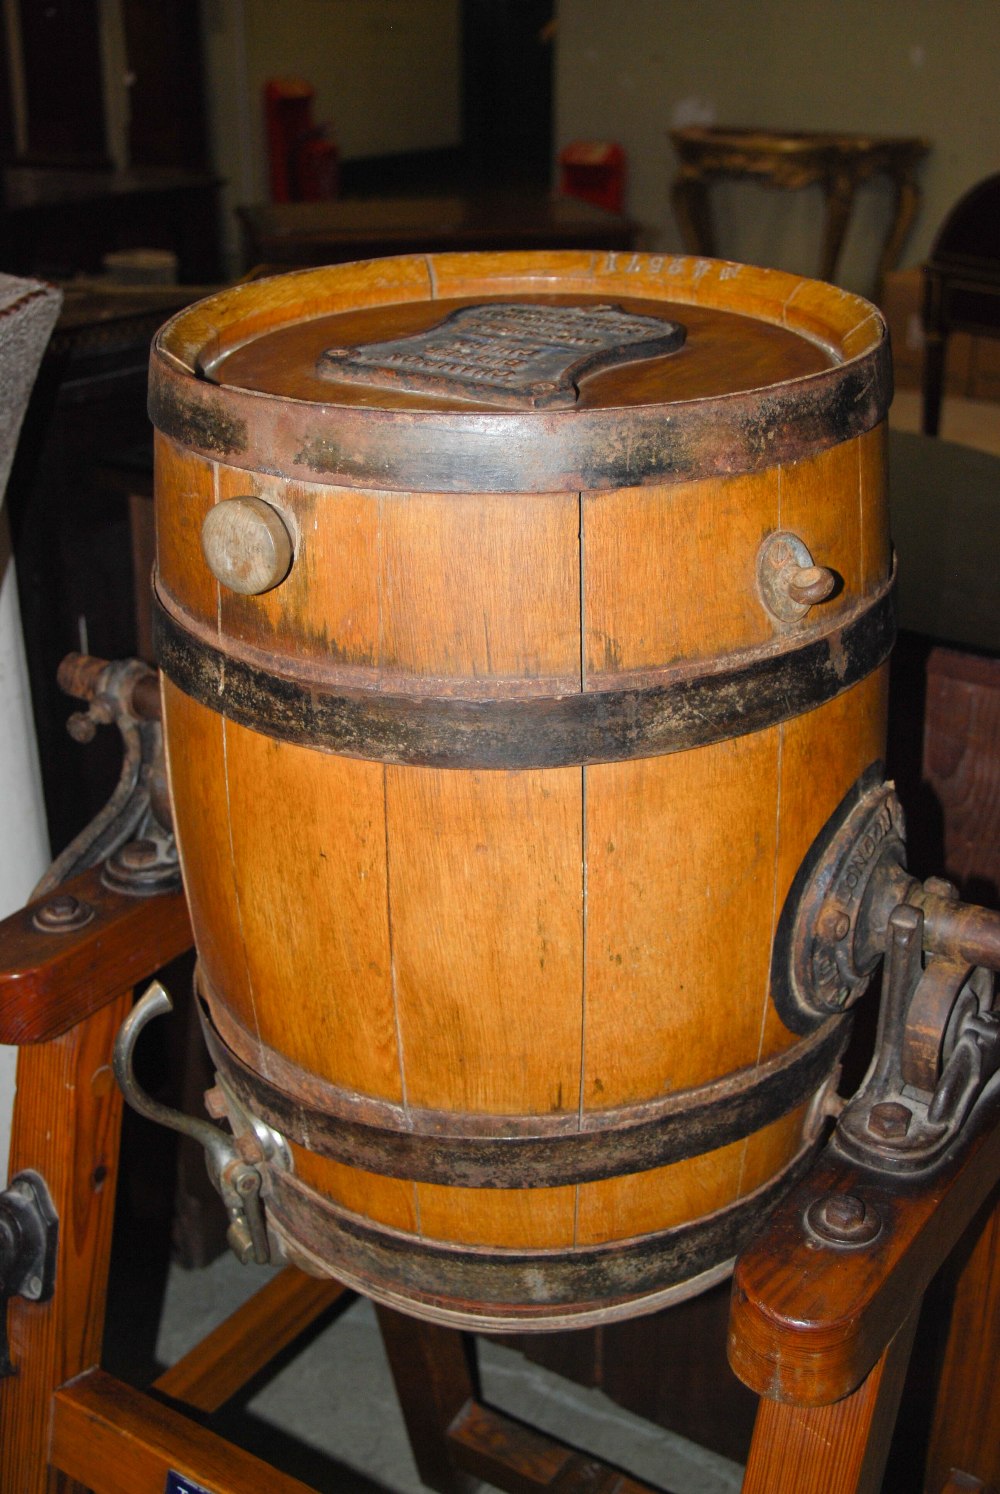 An early 20th century 'CHAMPION BUTTER CHURN' manufactured by The Diary Supply Co. Ltd., London, - Image 2 of 7